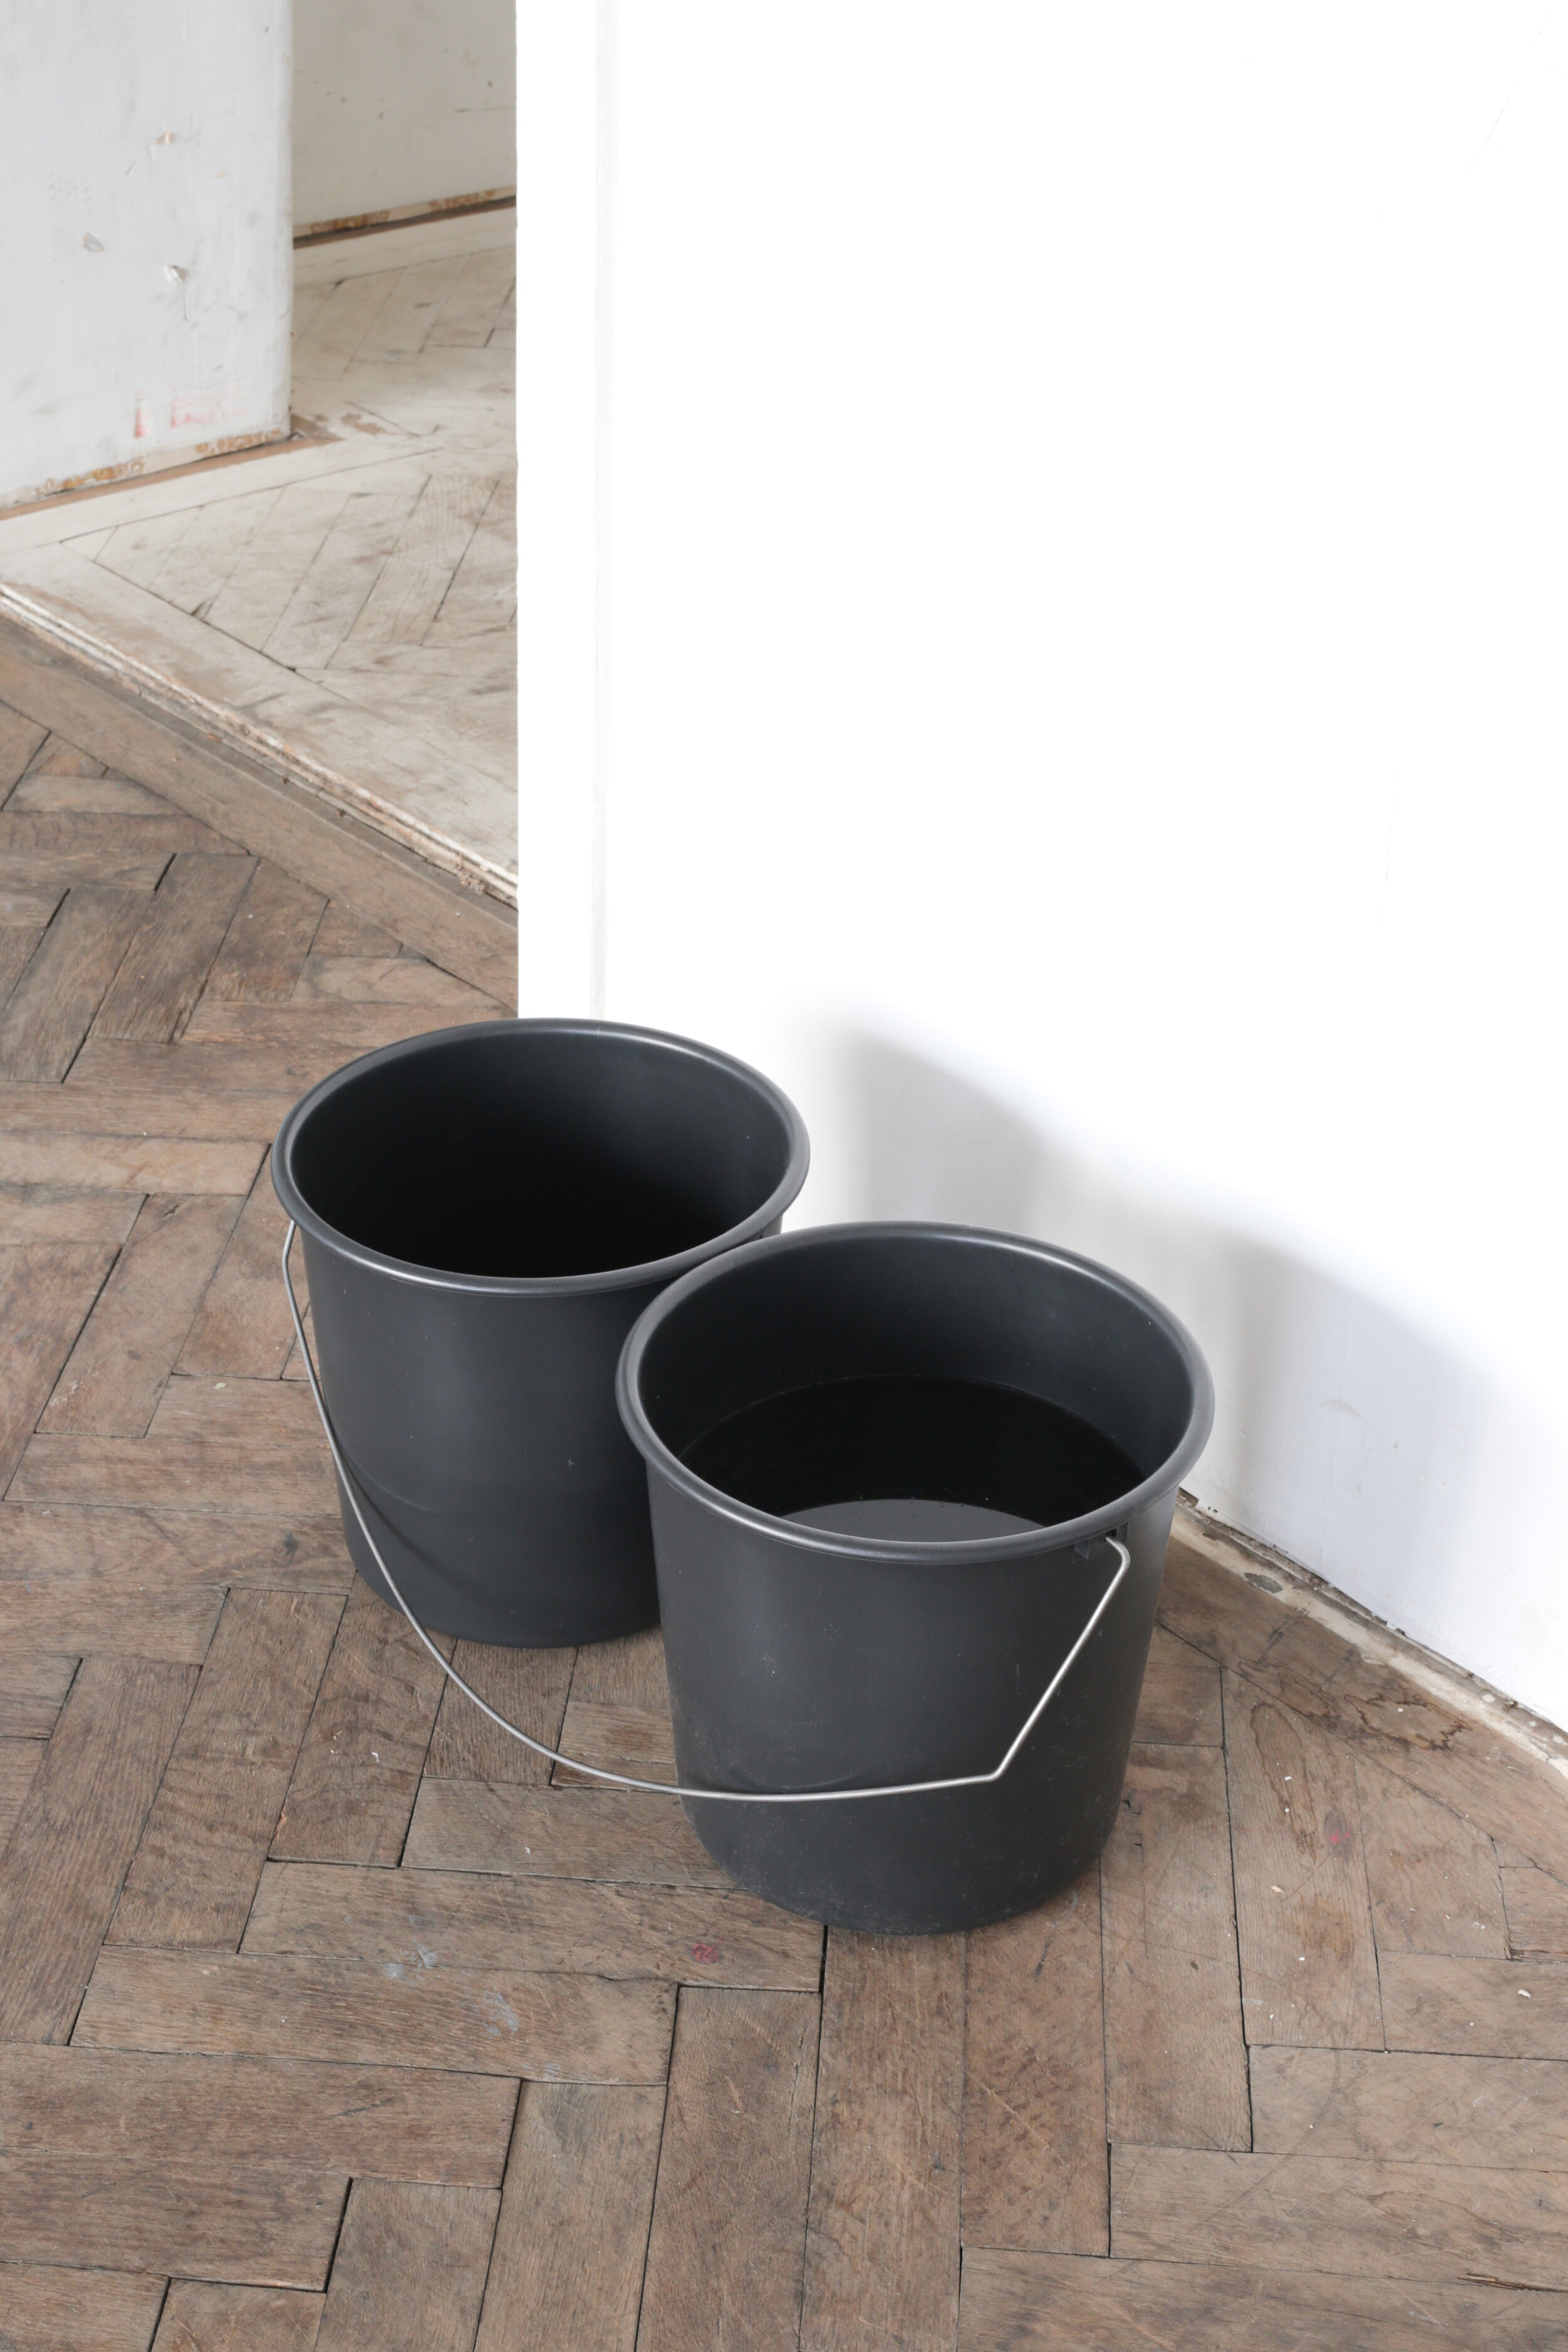   fig10 Untitled (two buckets, one handle)   